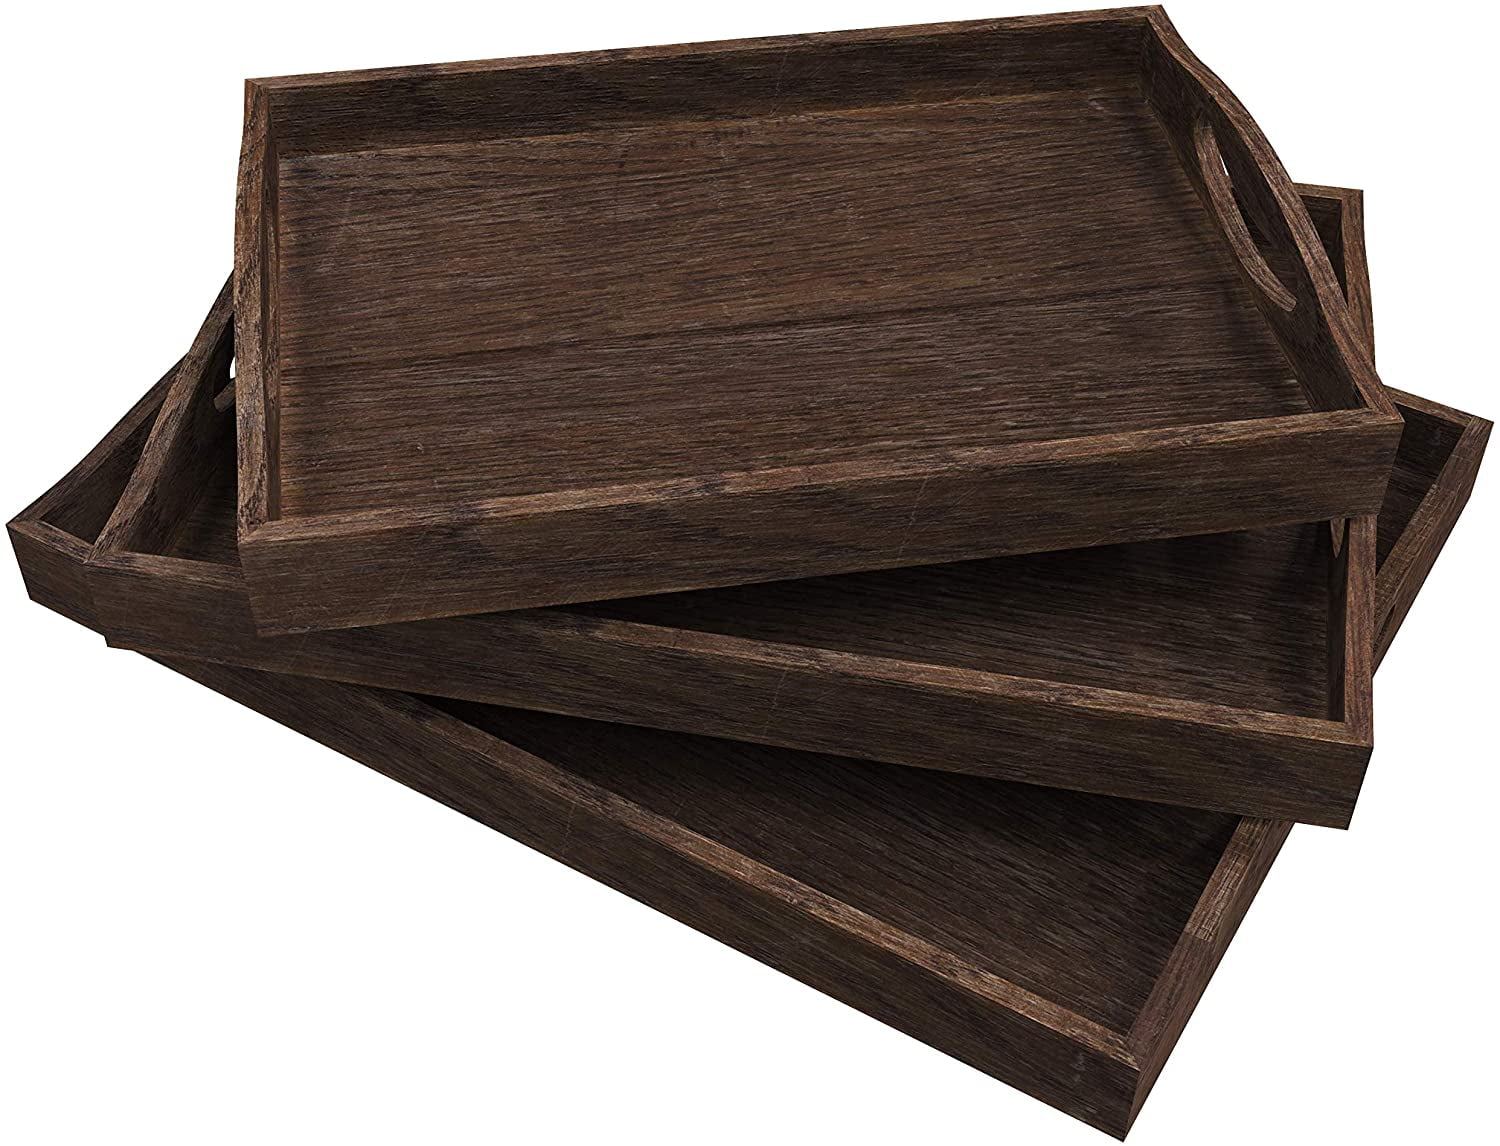 Coffee Table/Butler & More Set of 3 Medium and Small Light & Sturdy Paulownia Wood Large Nesting Multipurpose Trays for Breakfast Rustic Blue Rustic Wooden Serving Trays with Handle